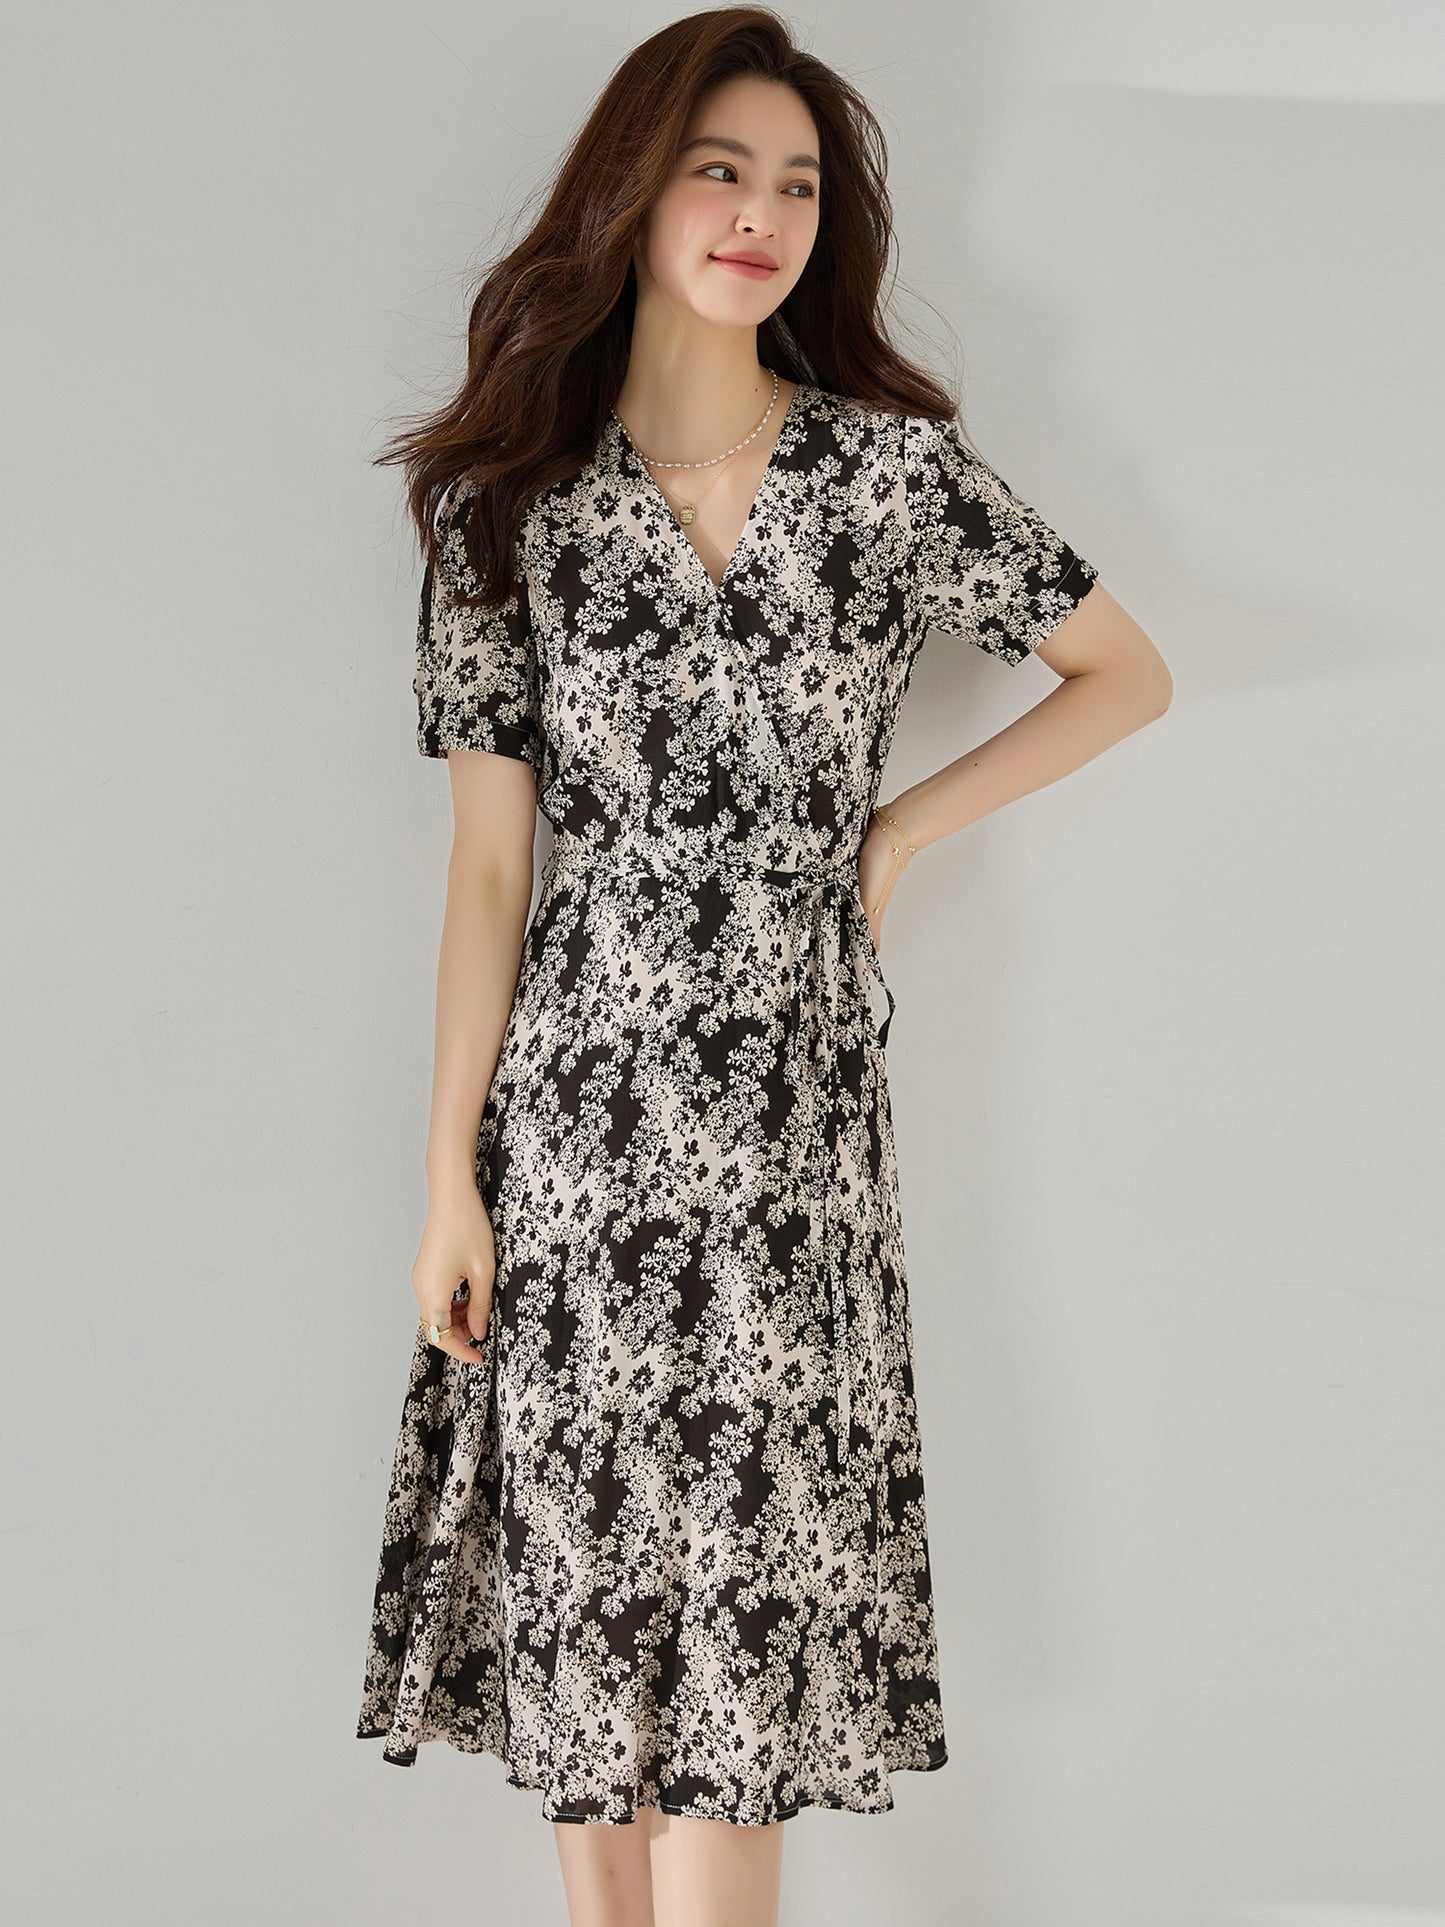 【C&M】Black and white floral dress